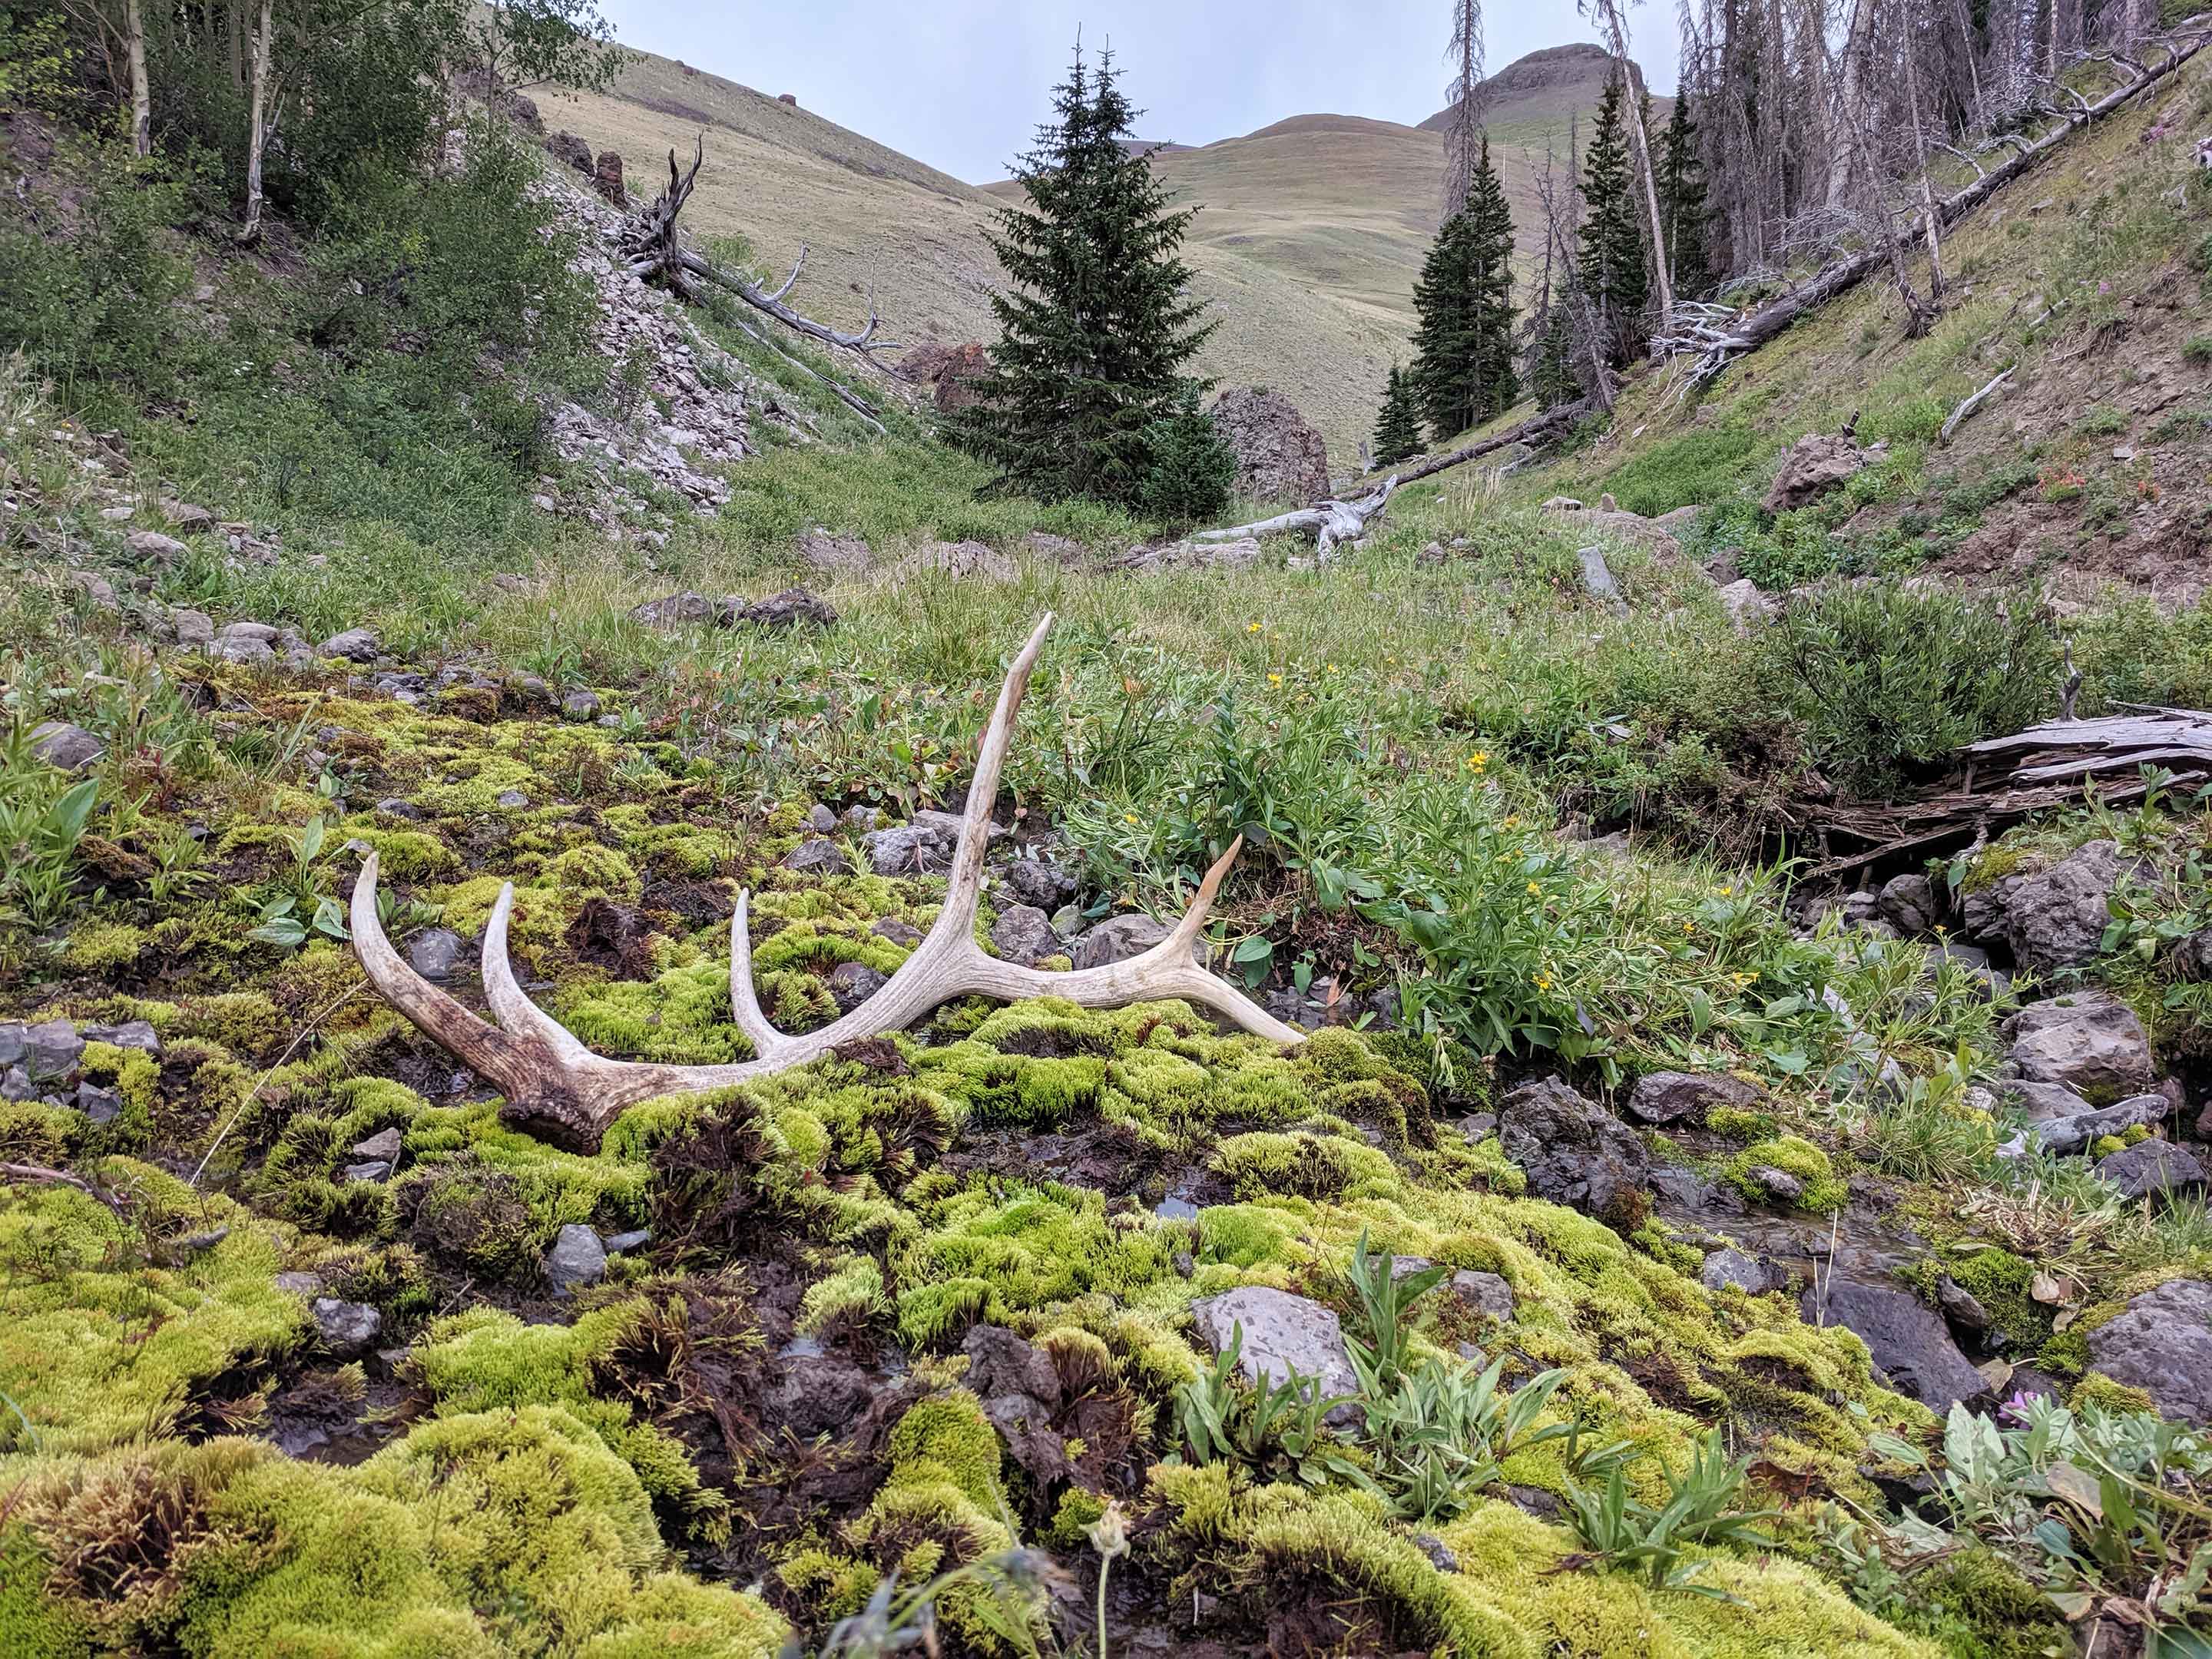 A set of antlers in a beautiful wilderness landscape